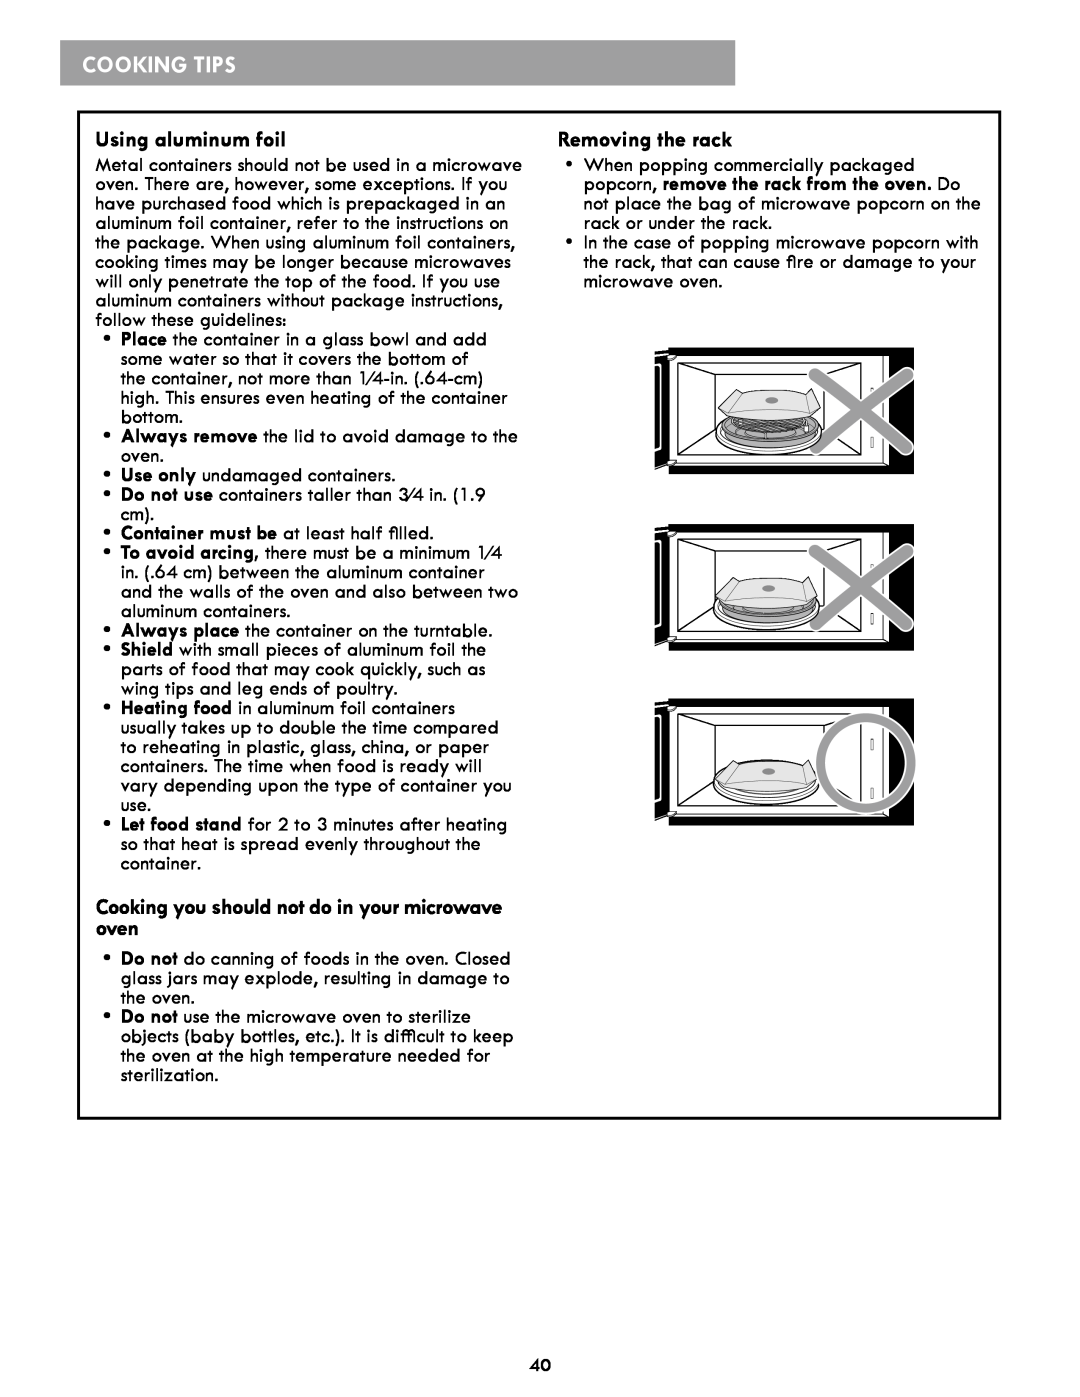 Kenmore 86019 manual Cooking Tips, Using aluminum foil, Cooking you should not do in your microwave oven, Removing the rack 